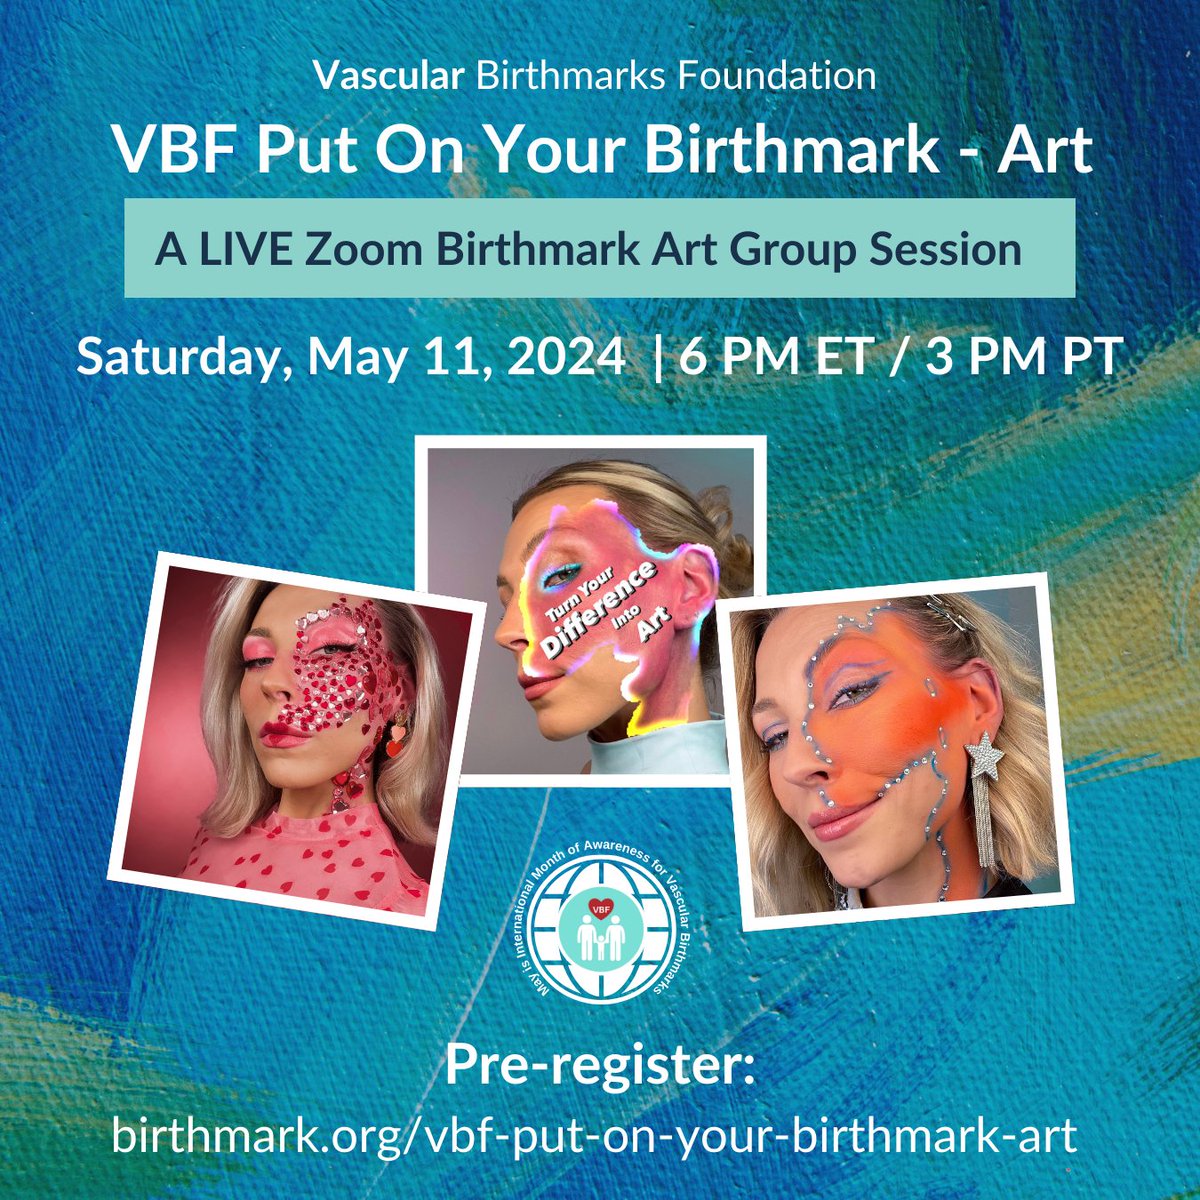 Register for VBF's Put On Your Birthmark - Art, a special collaborative LIVE Zoom event happening on Saturday, May 11, 2024, at 6 PM ET / 3 PM PT: birthmark.org/vbf-put-on-you…